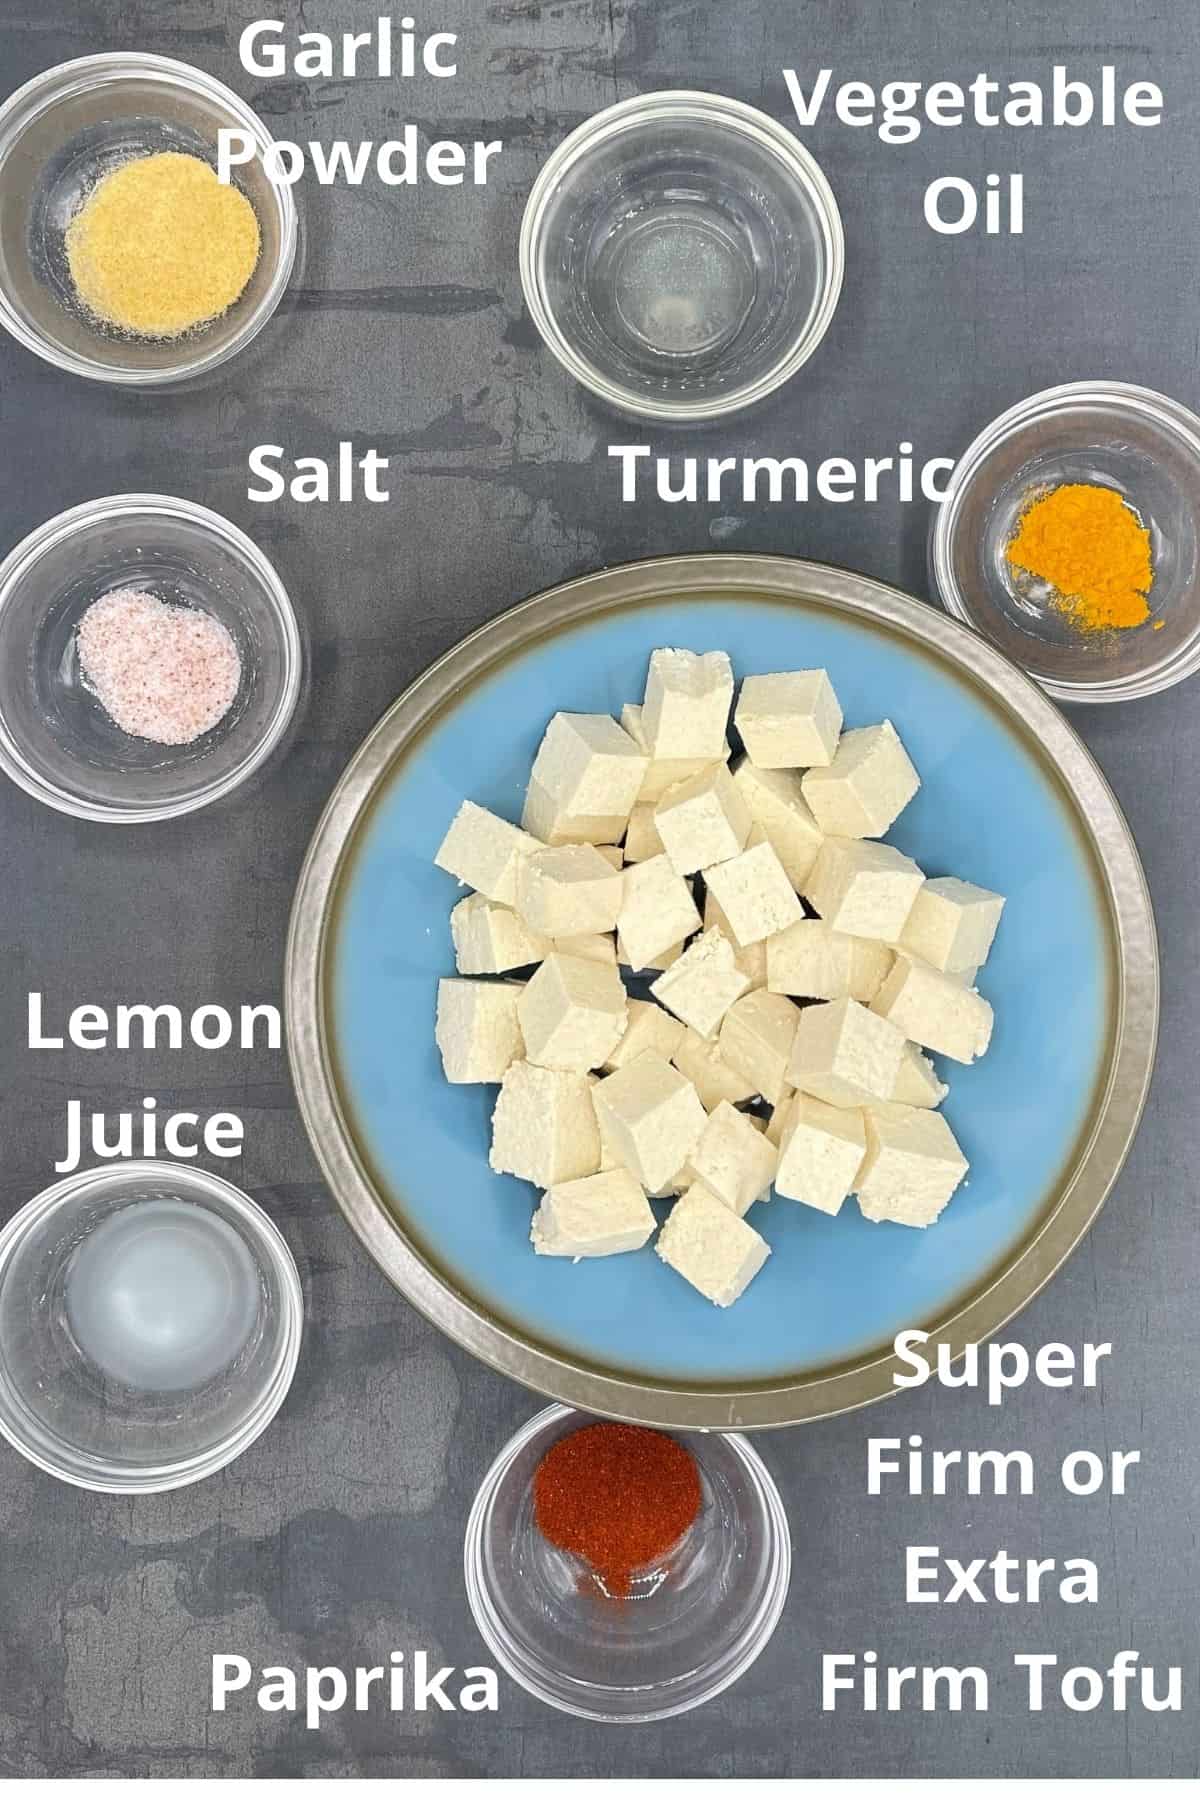 Photo of ingredients for air fryer tofu, with an overlay of the names, including garlic powder, vegetable oil, salt, turmeric, lemon juice, paprika and tofu.